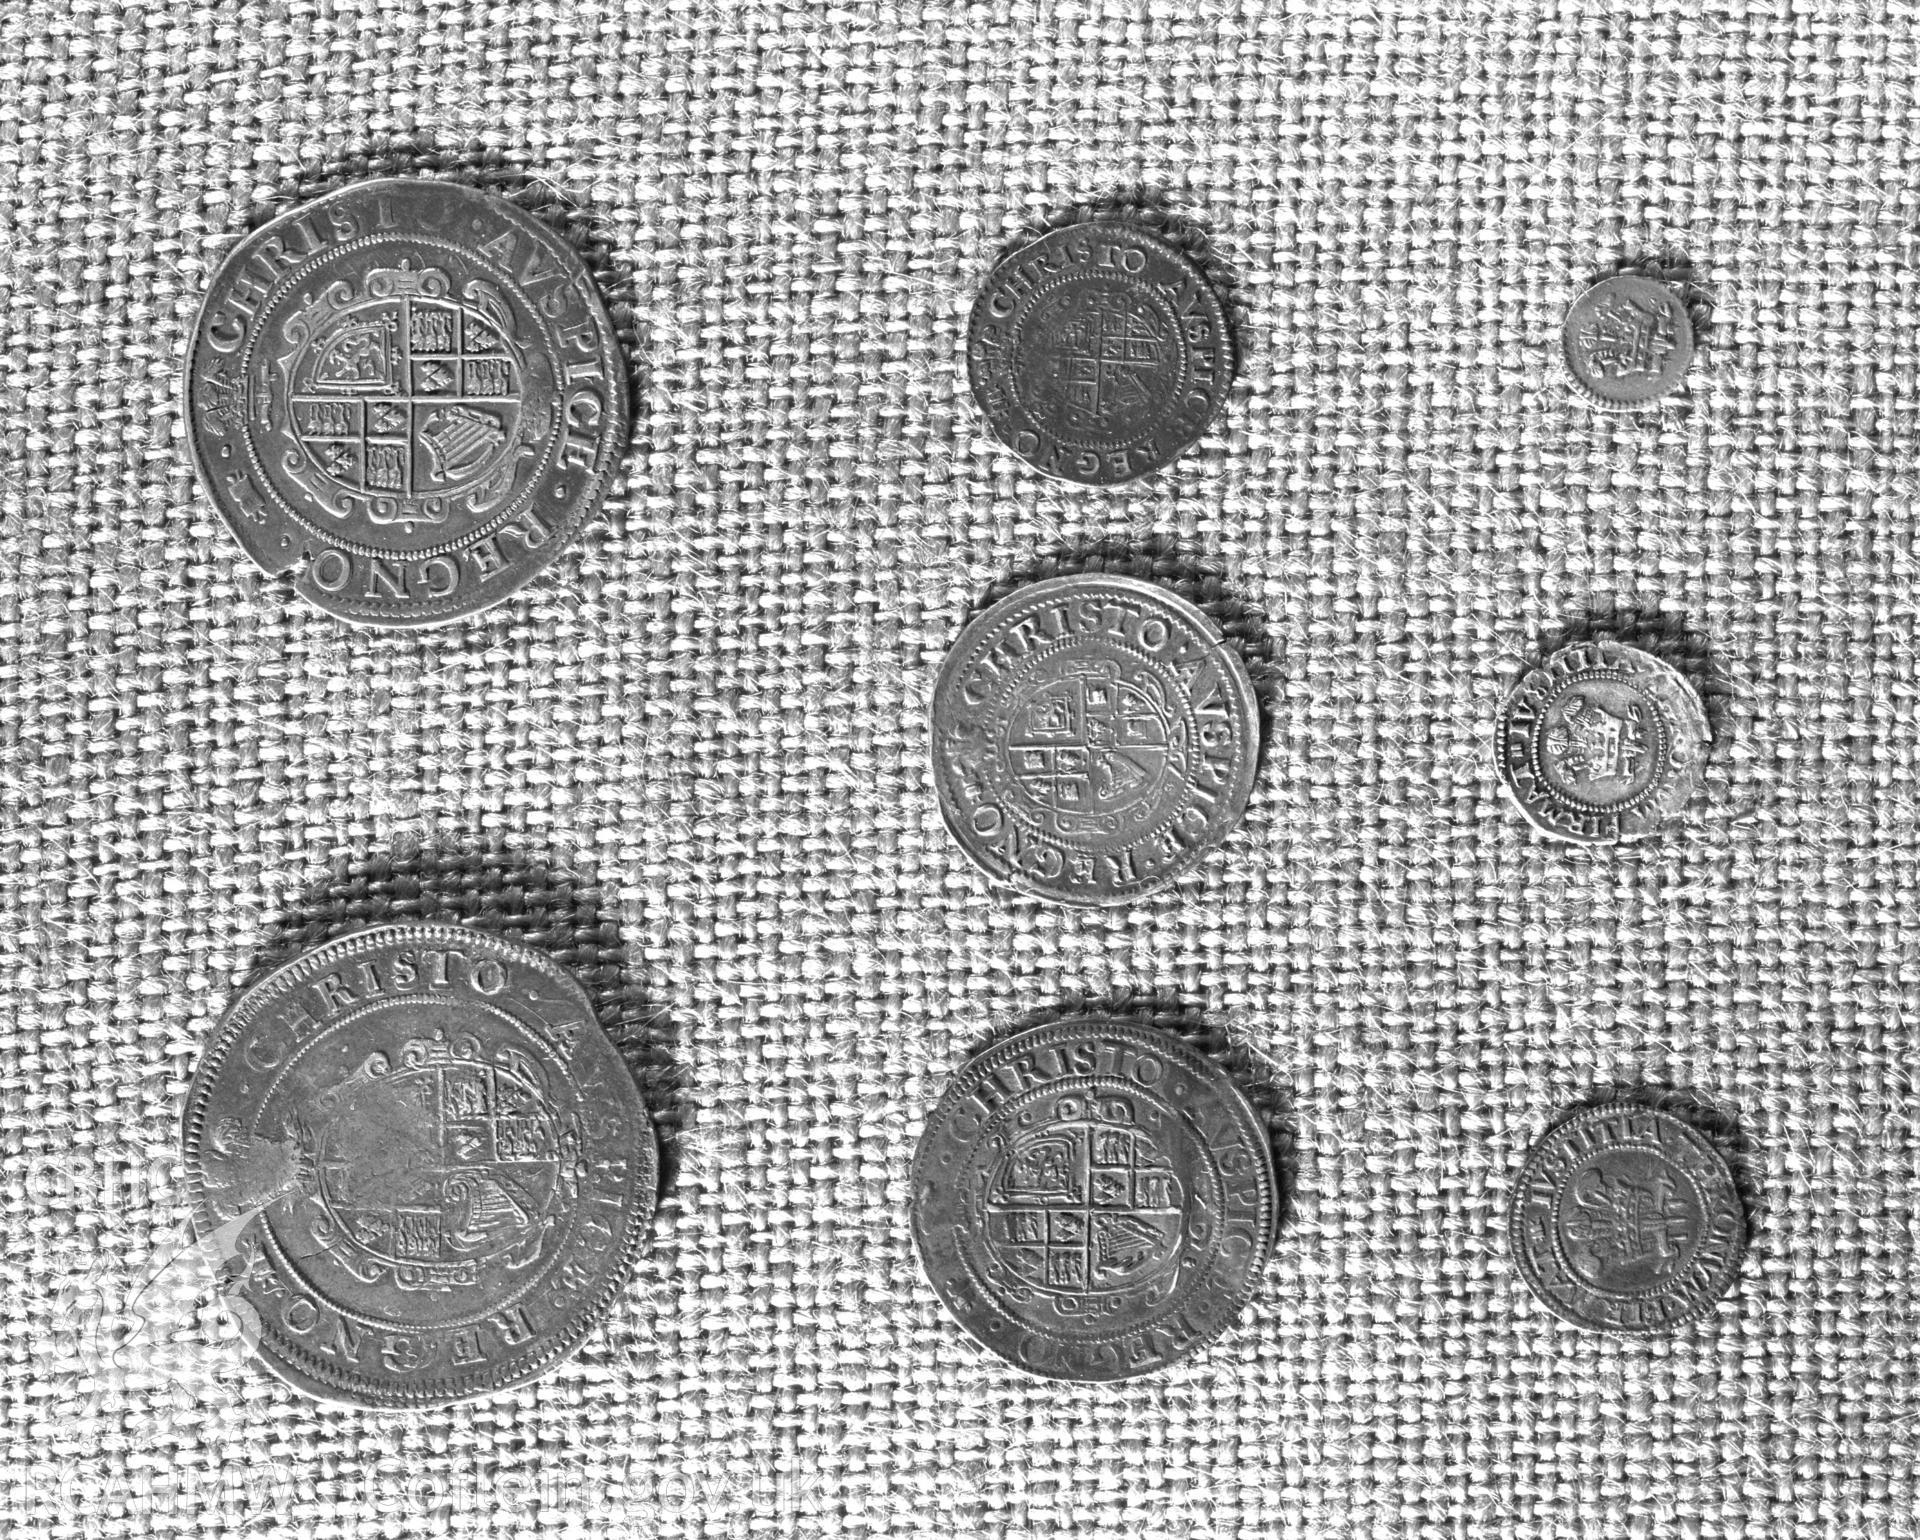 Black and white acetate negative showing coins from Aberystwyth Mint.